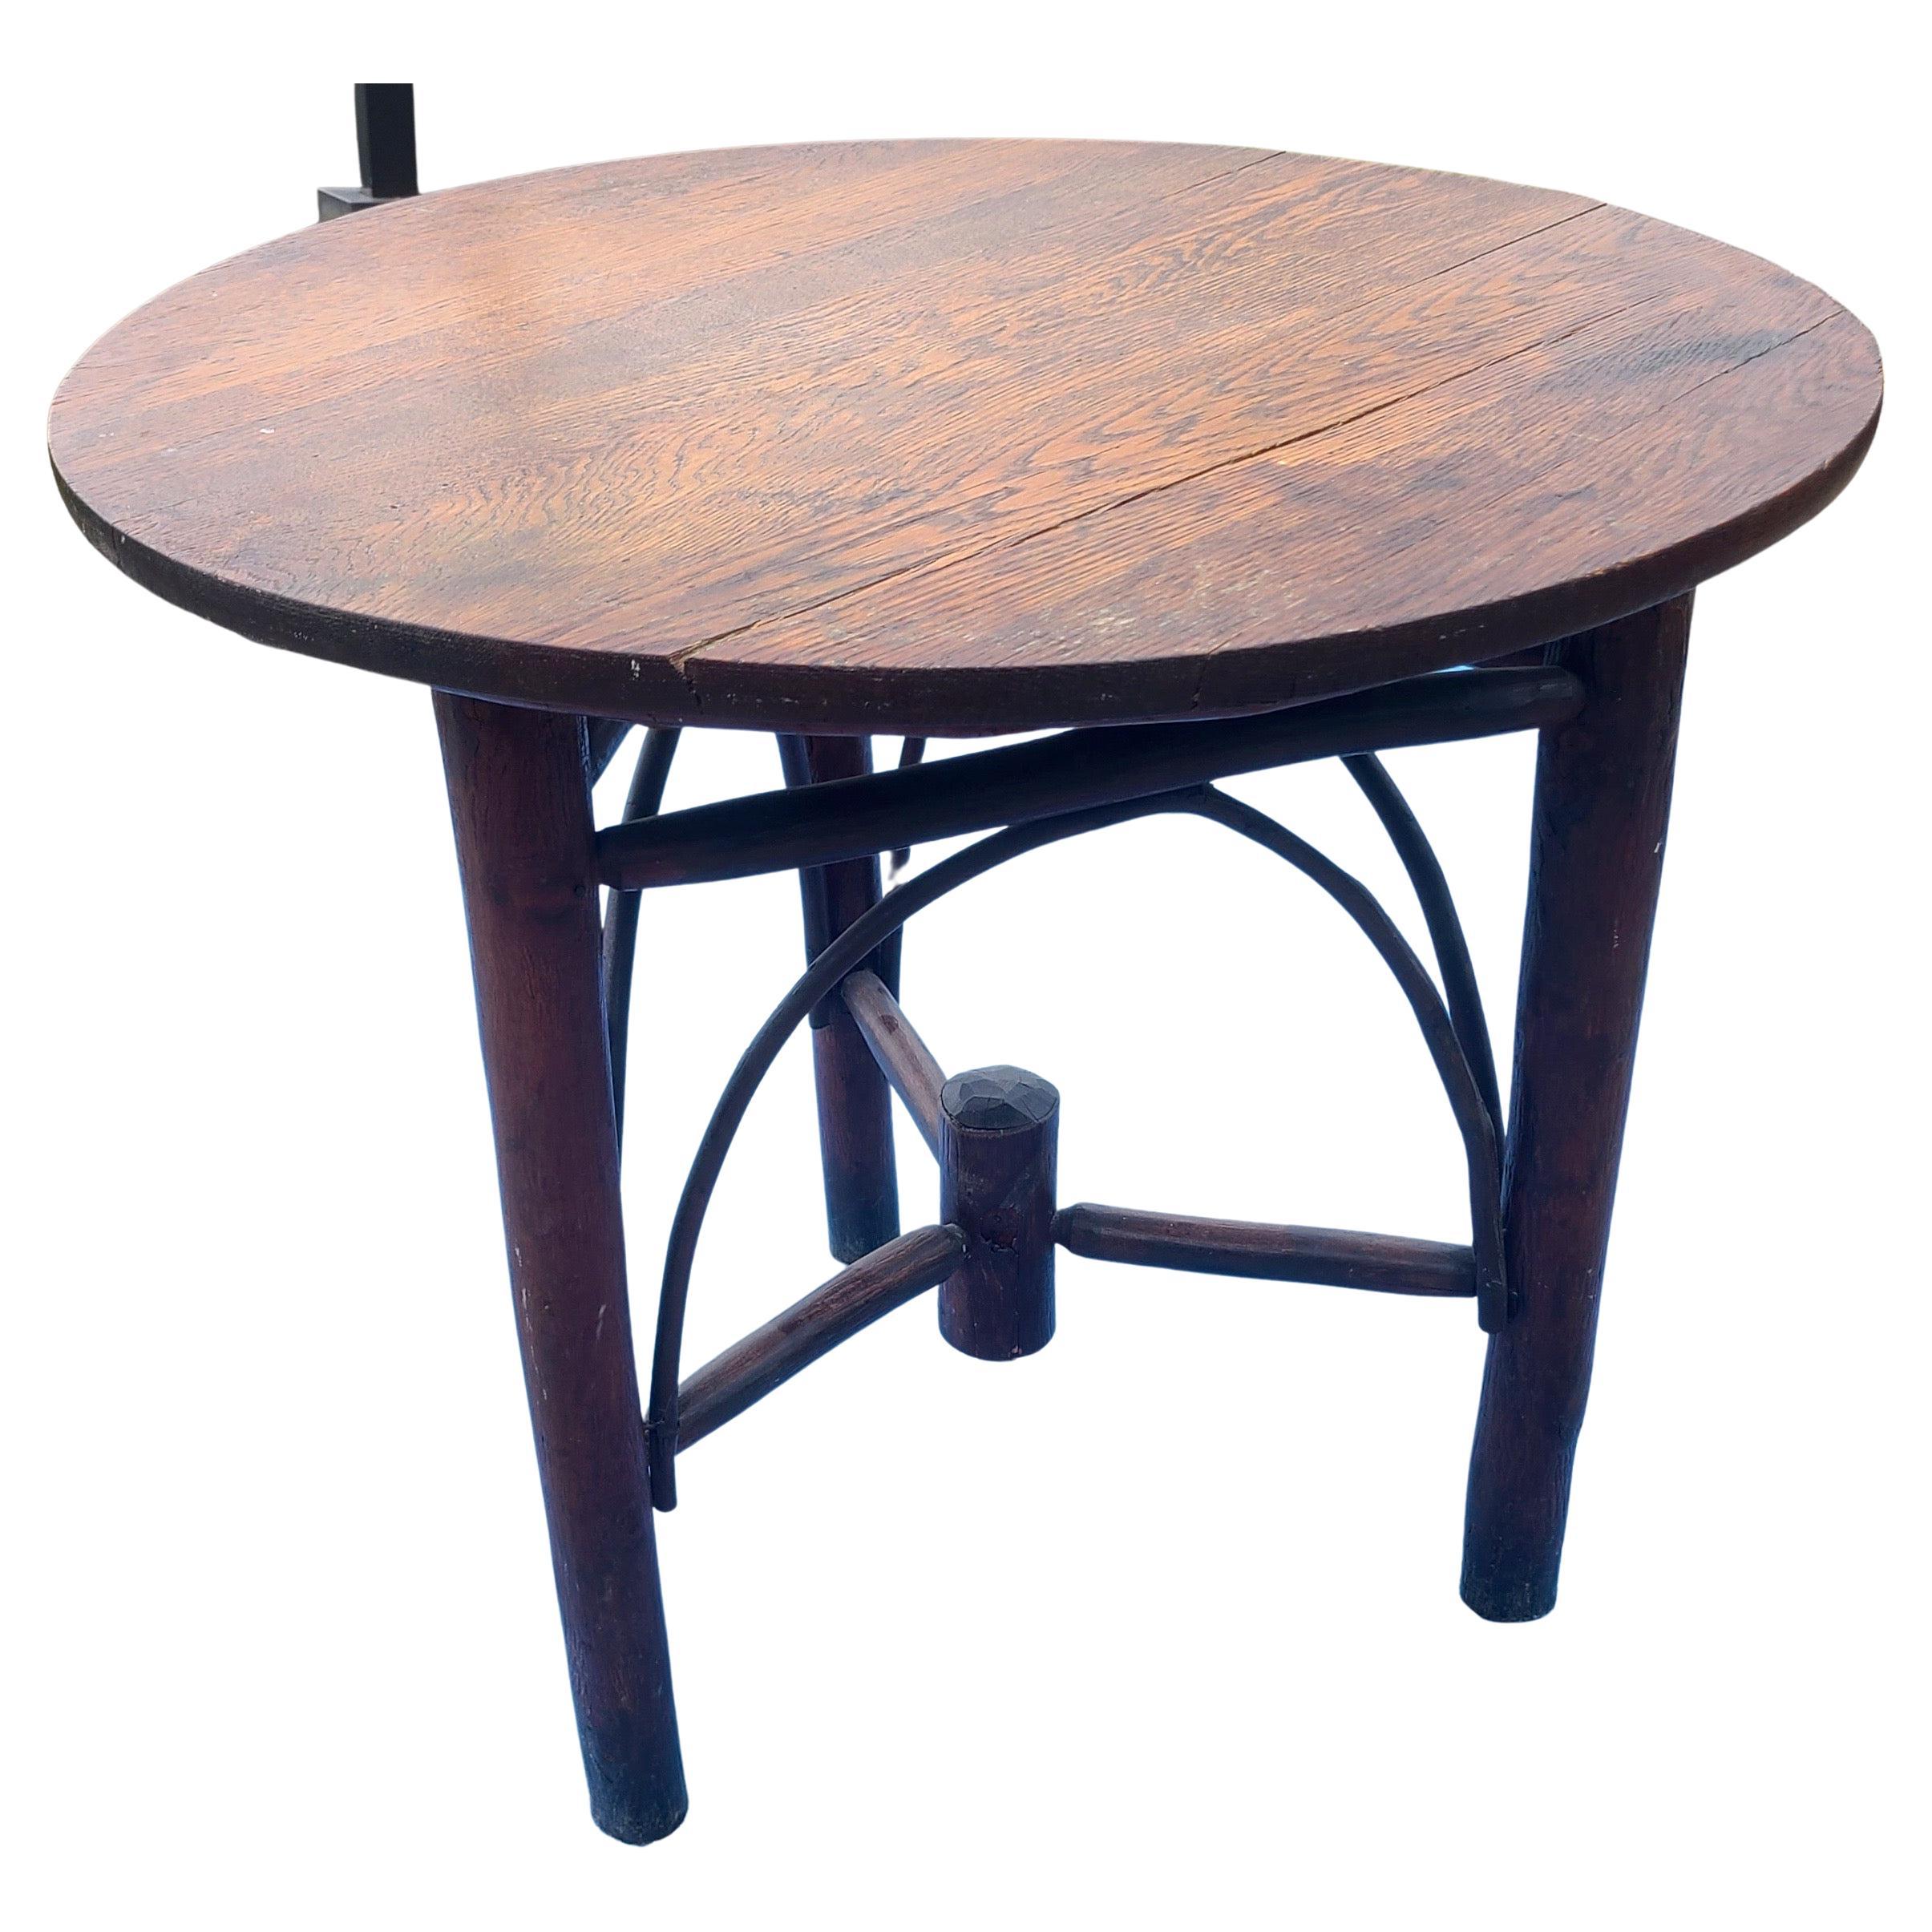 Adirondack Tavern Table by Old Hickory Arts & Crafts Mission